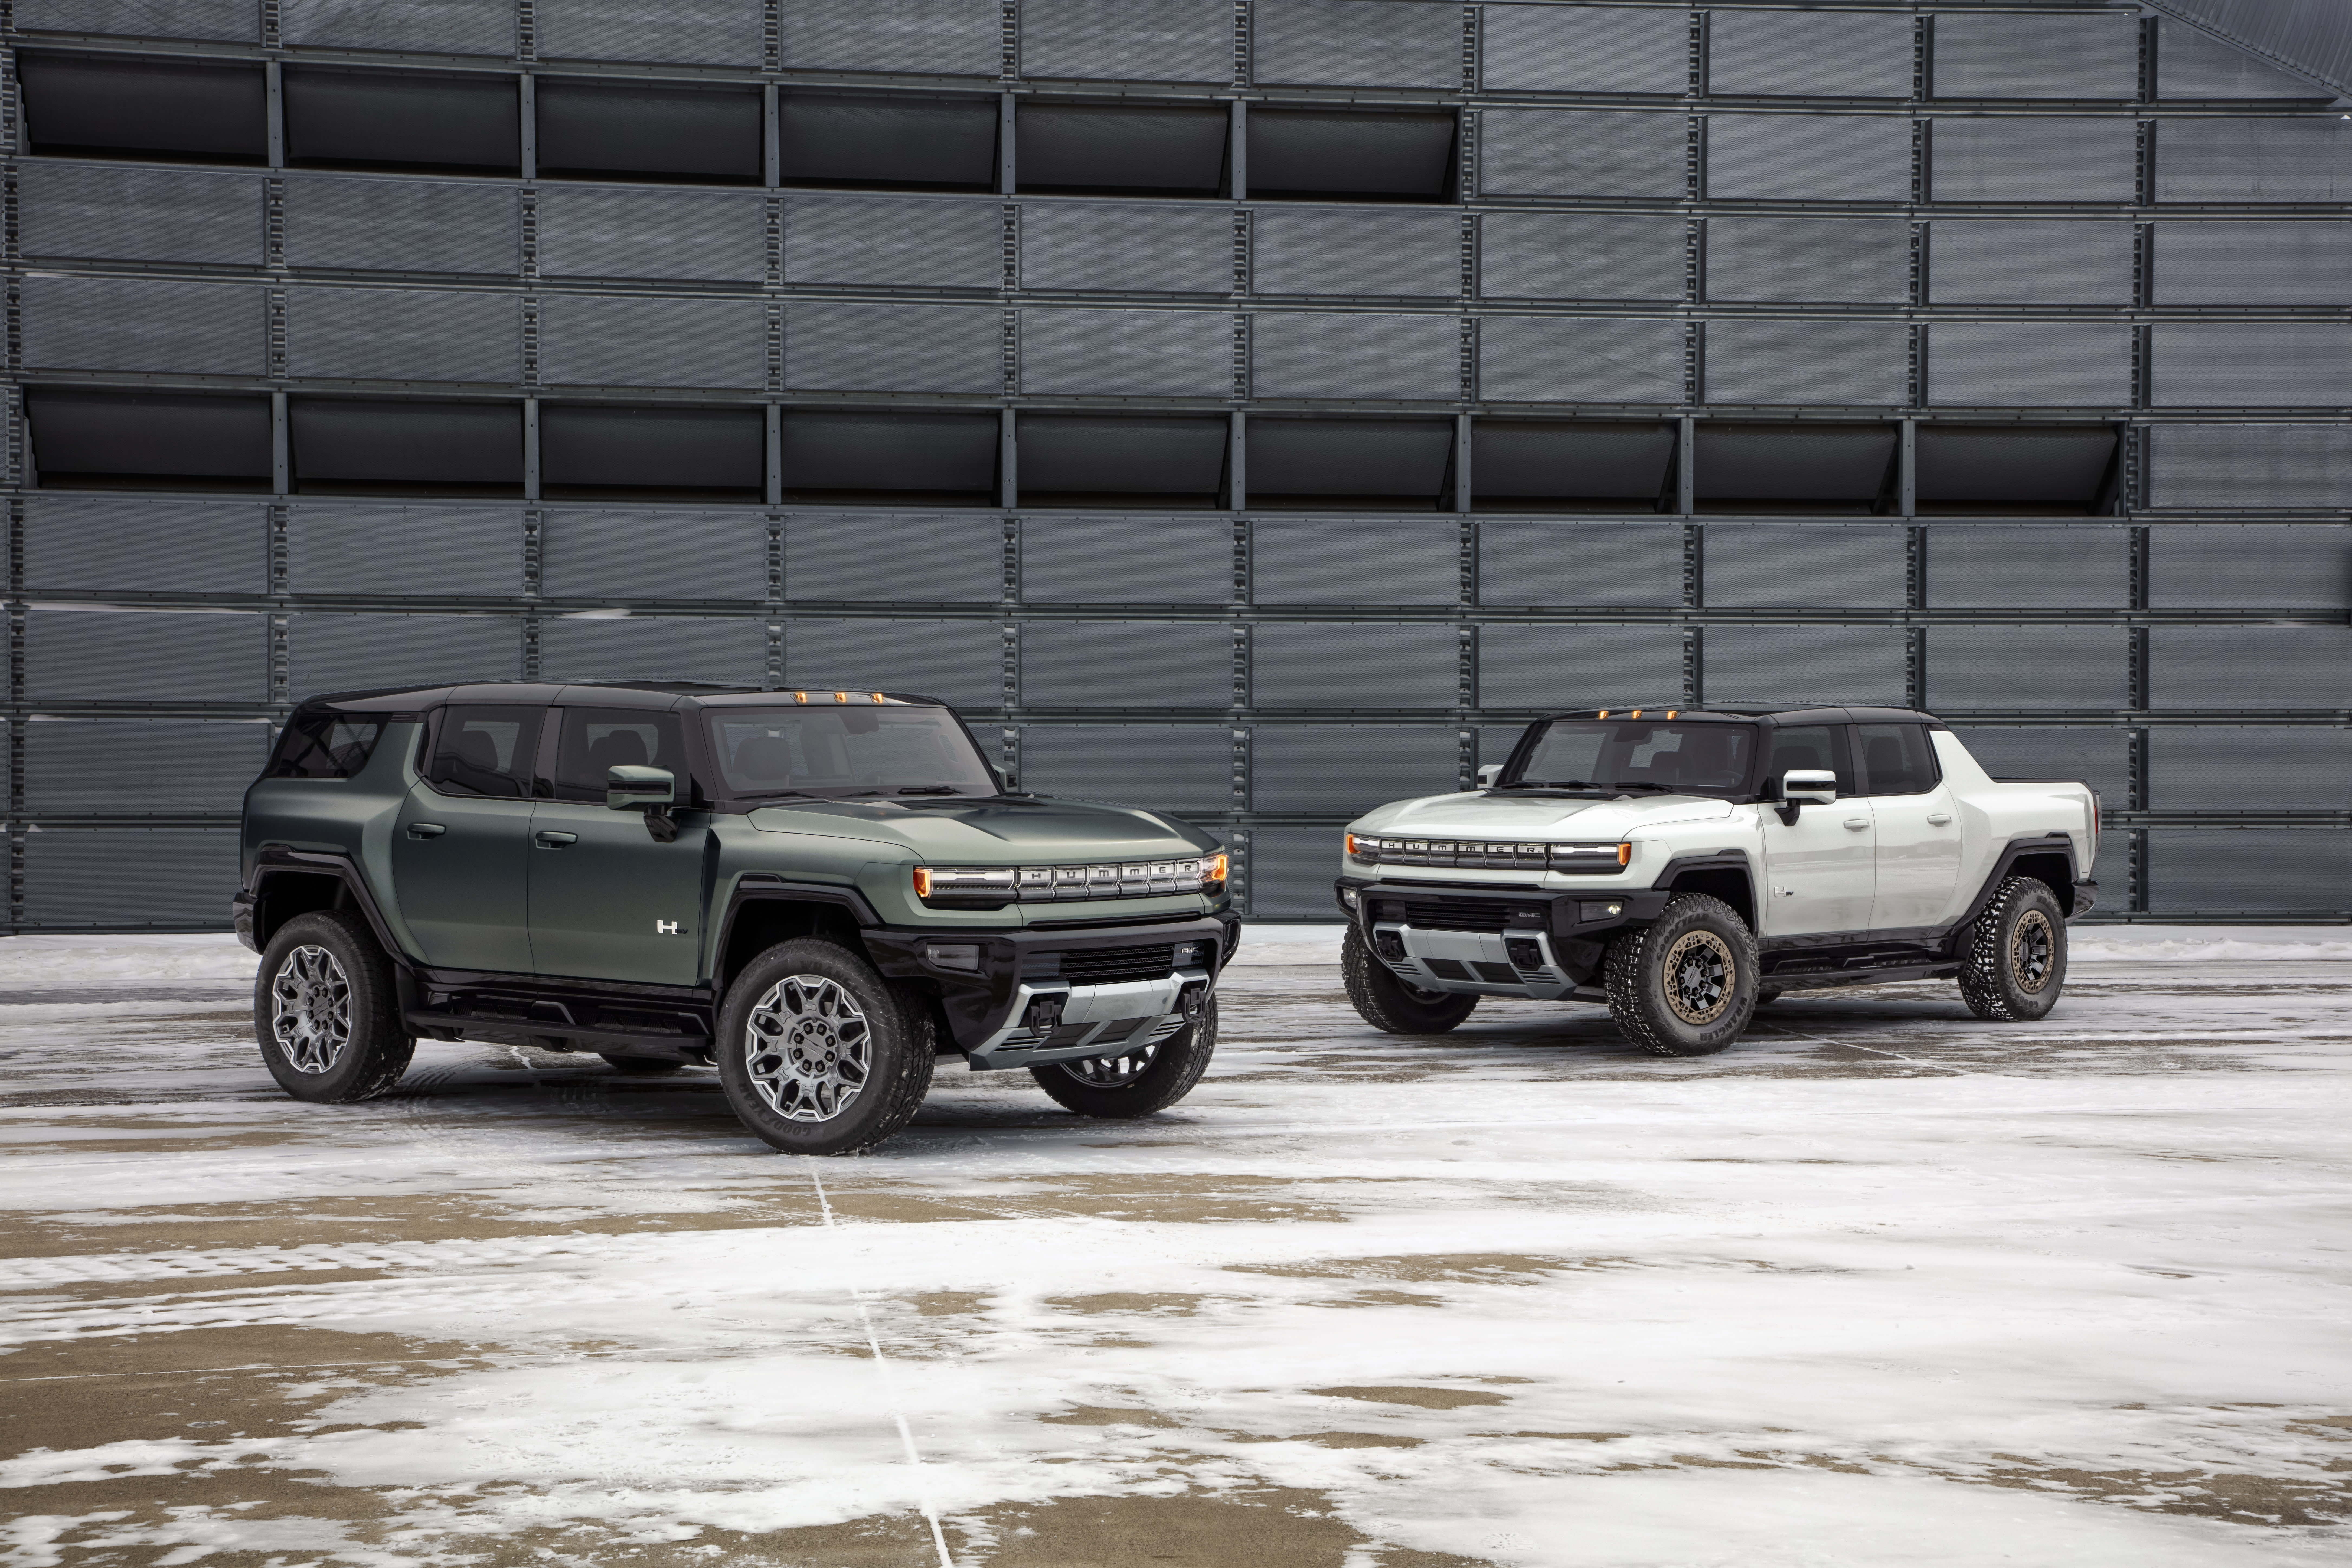 GM unveils electric Hummer SUV topping $110,000